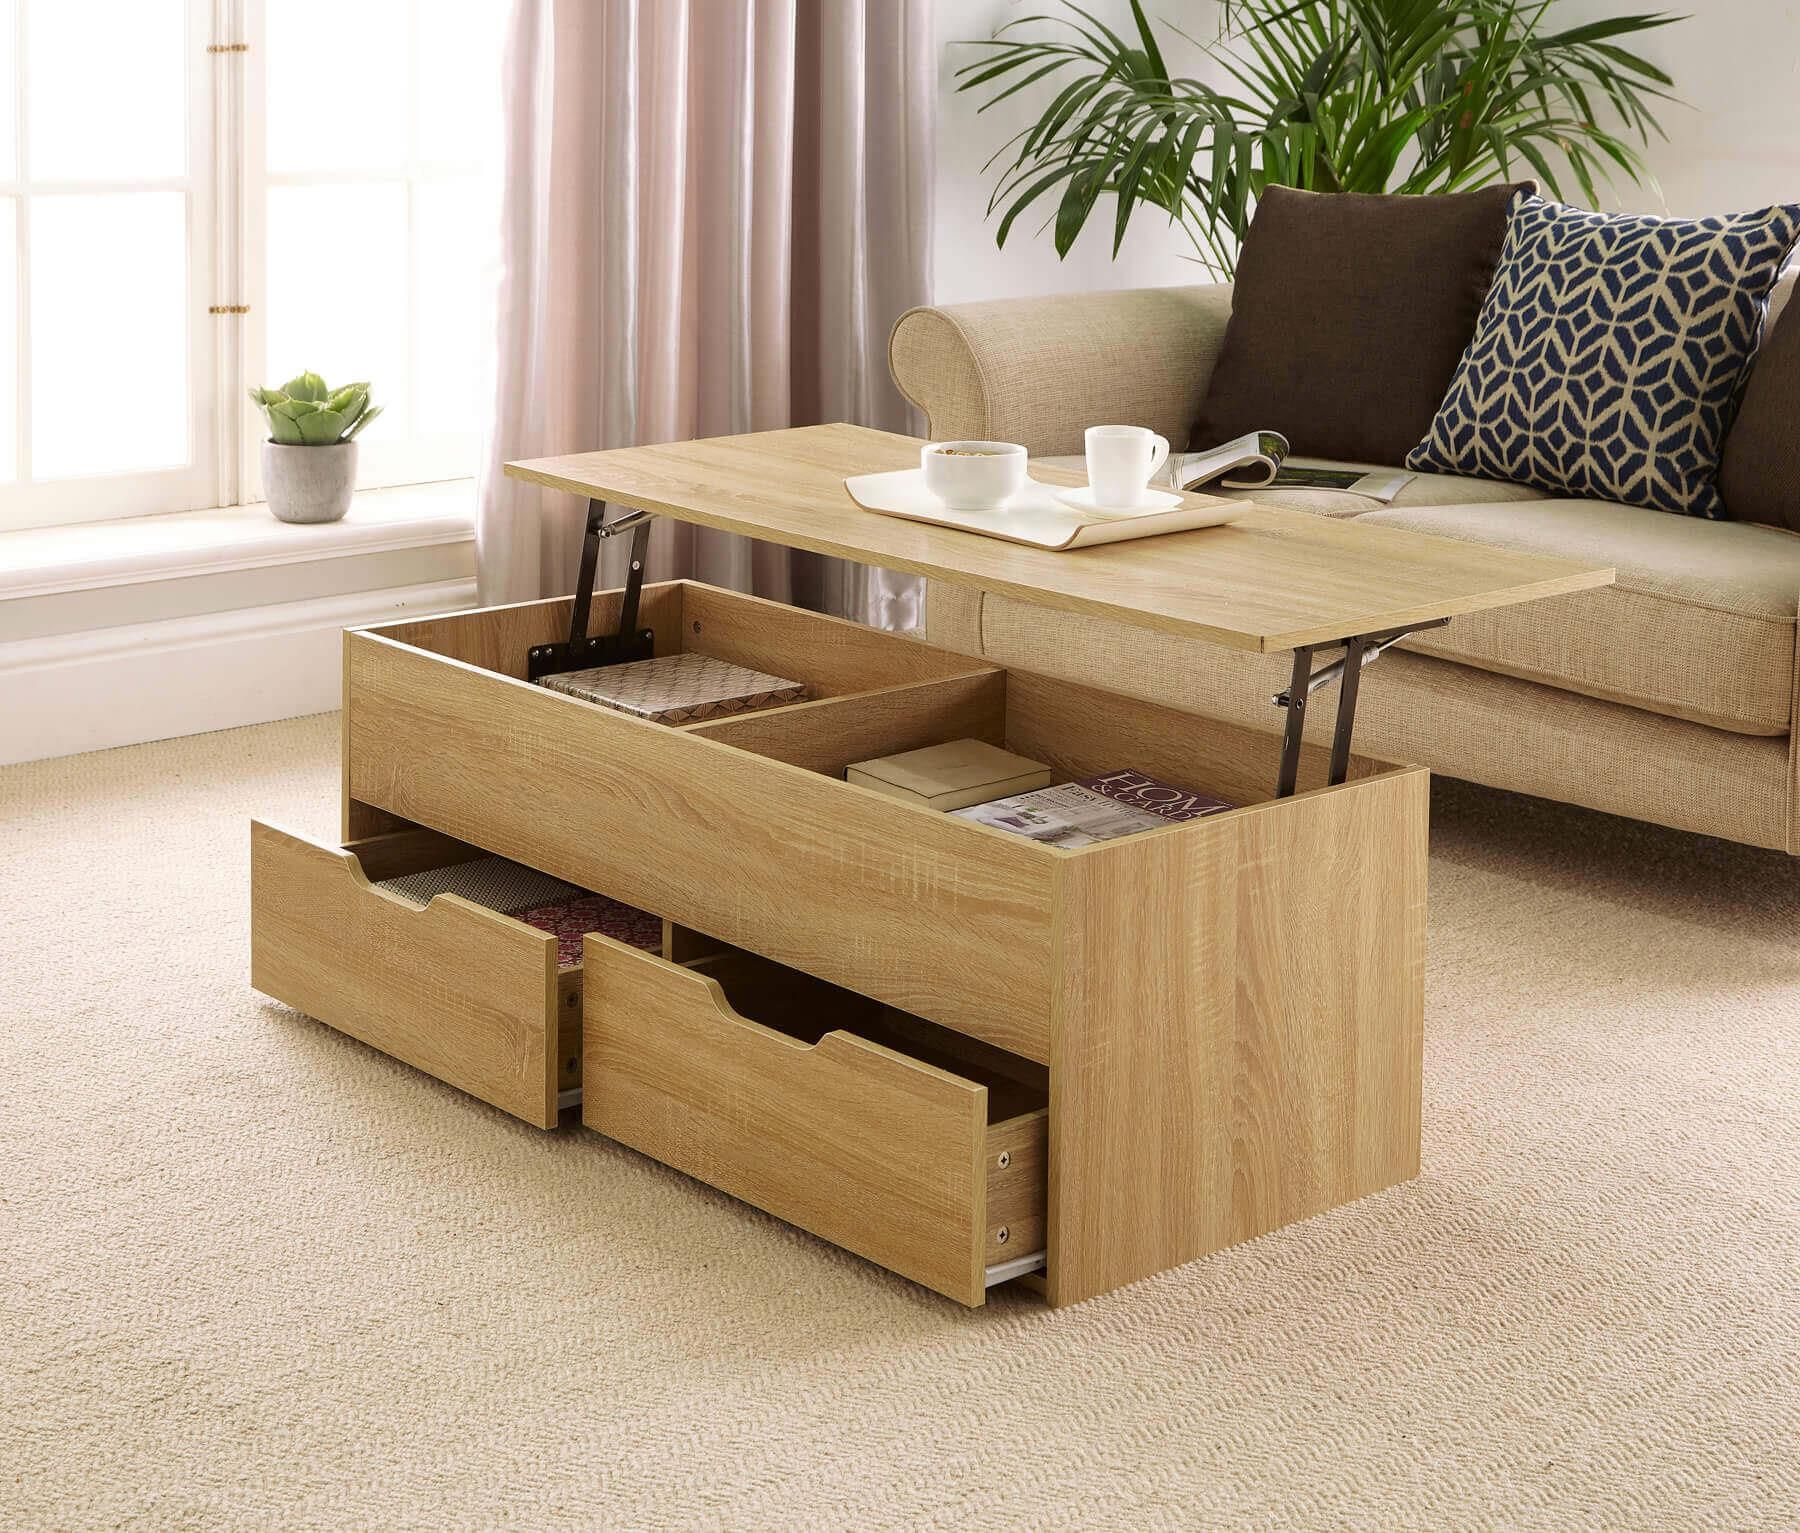 Oak Wooden Coffee Table With Lift Up Top And 2 Large Storage Drawers In Lift Top Coffee Tables With Storage Drawers (View 5 of 15)